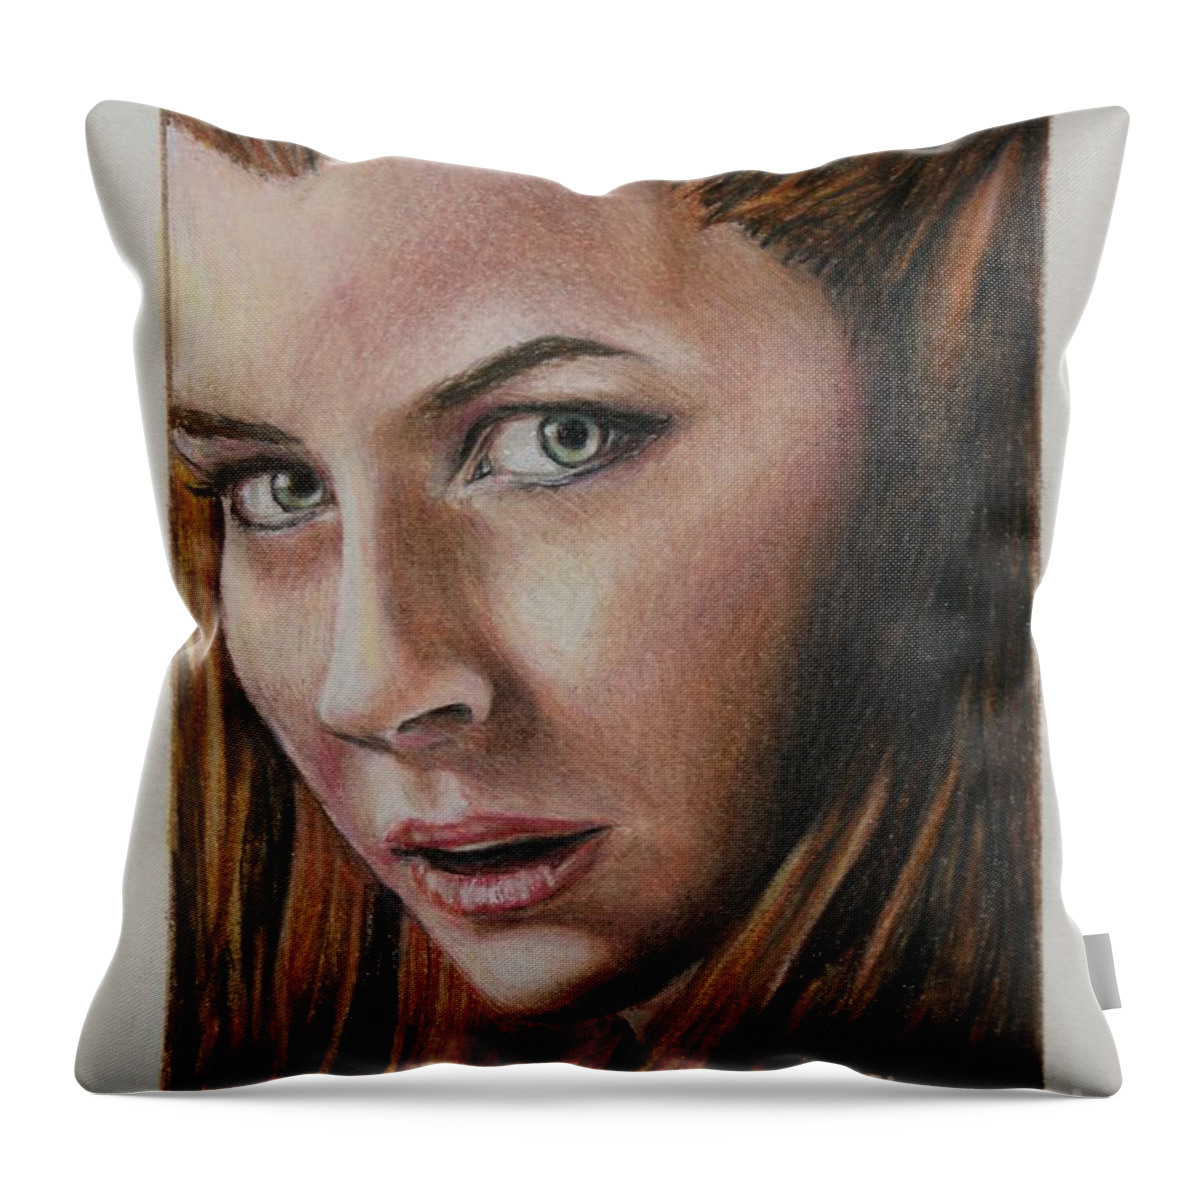 Hobbit Throw Pillow featuring the drawing Tauriel / Evangeline Lilly by Christine Jepsen